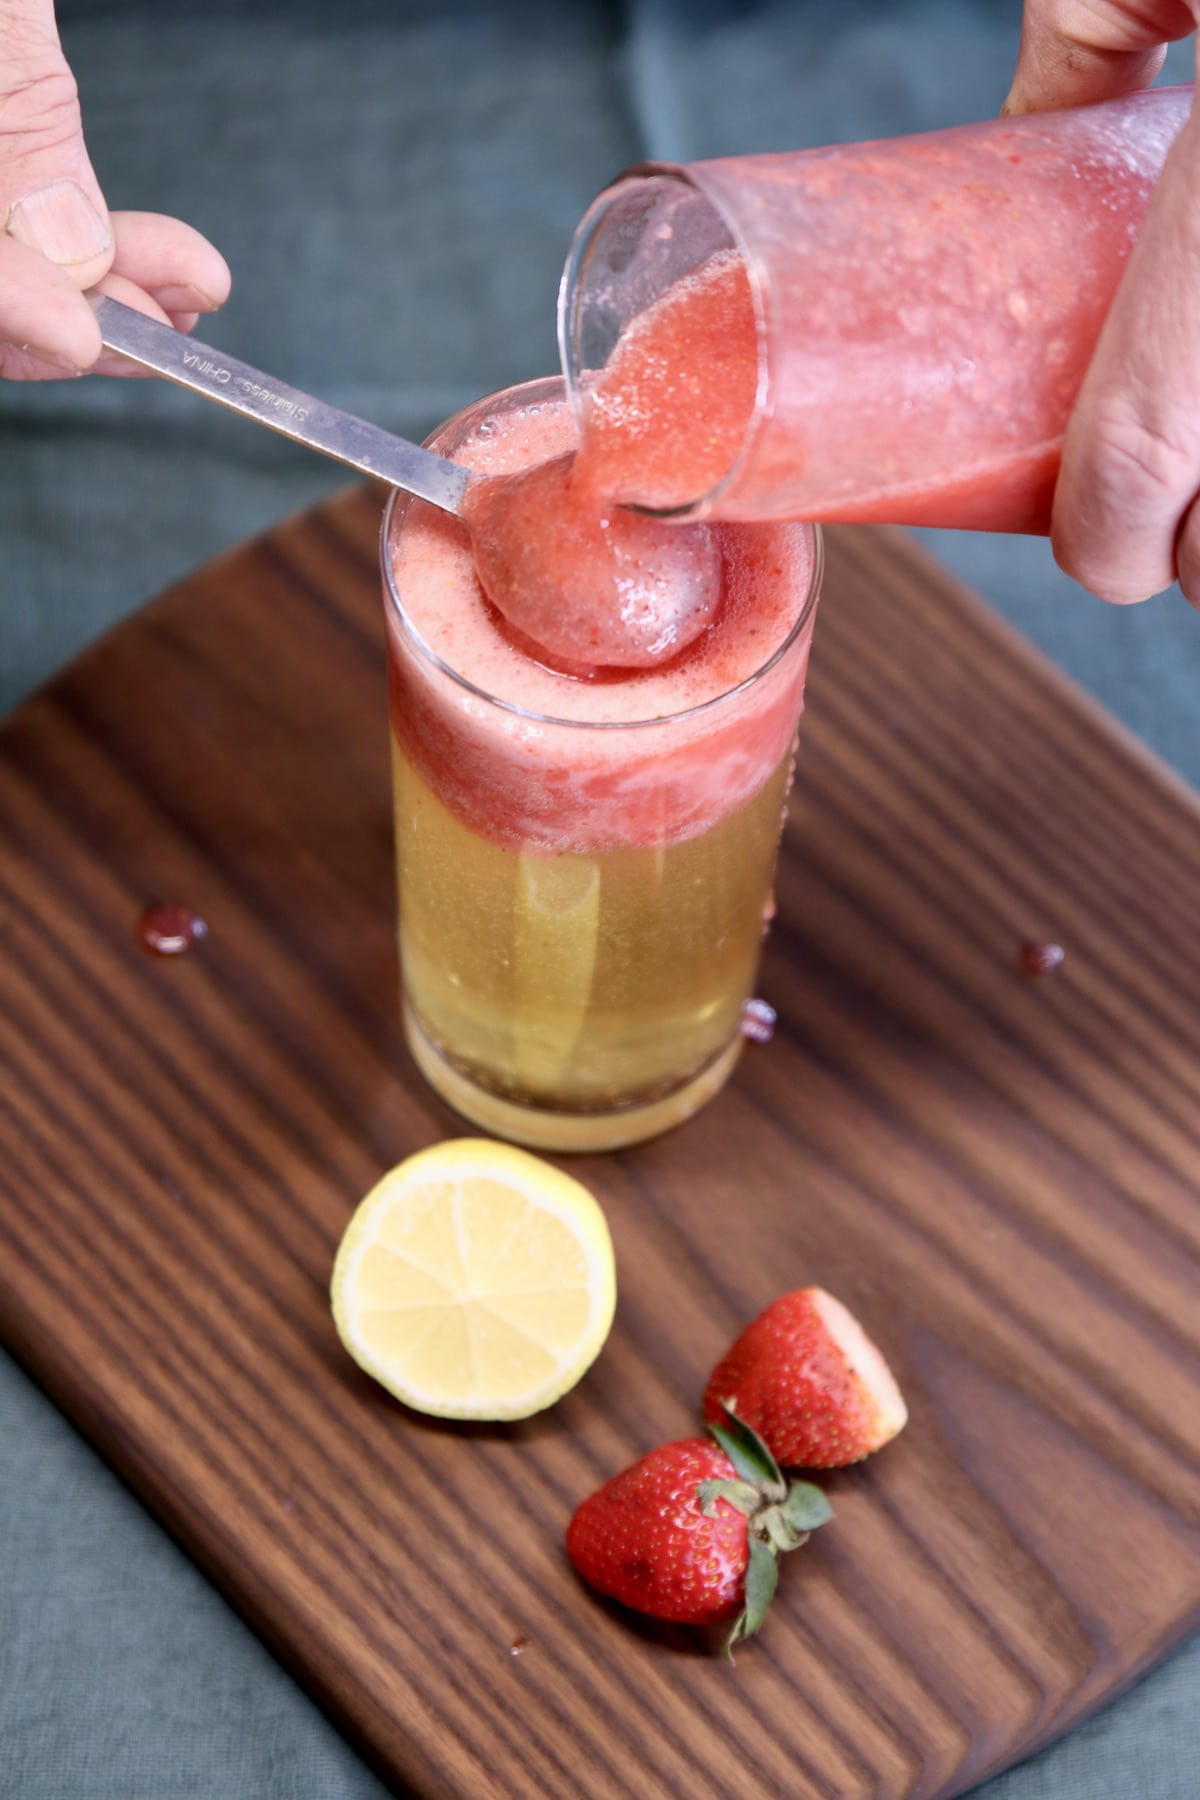 pouring strawberry mixture over a spoon into beer glass.